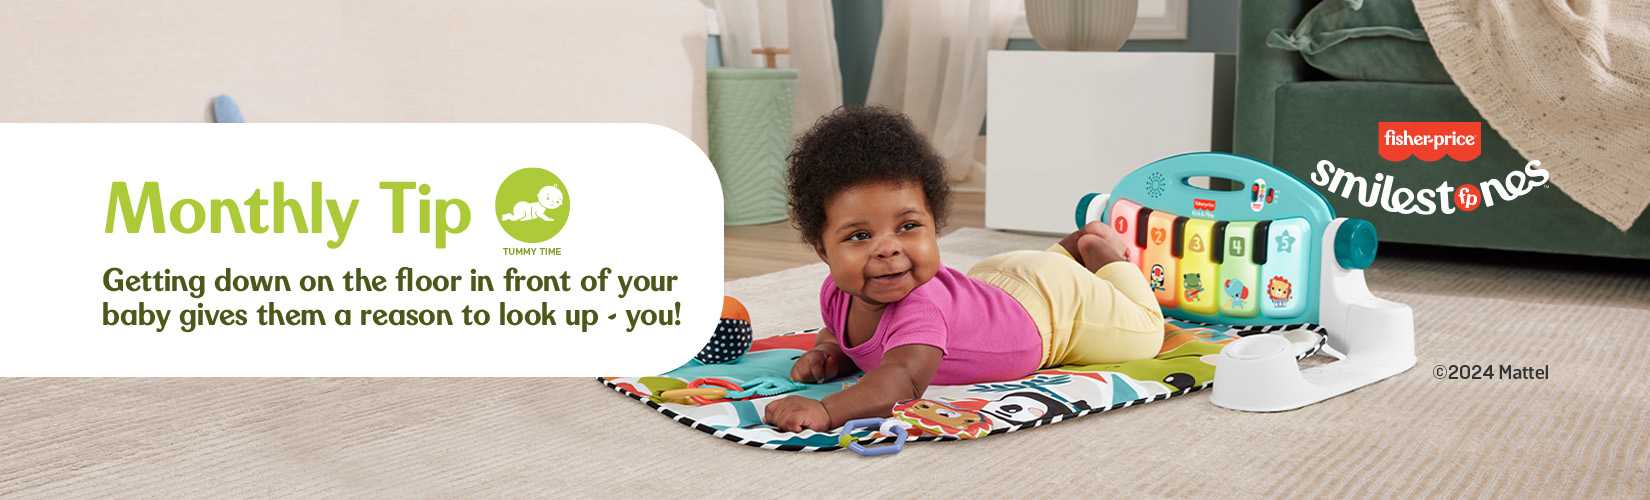  Fisher-price. Smilestones. Monthly Tip. Getting down on the floor in front of your baby gives them a reason to look up - you!